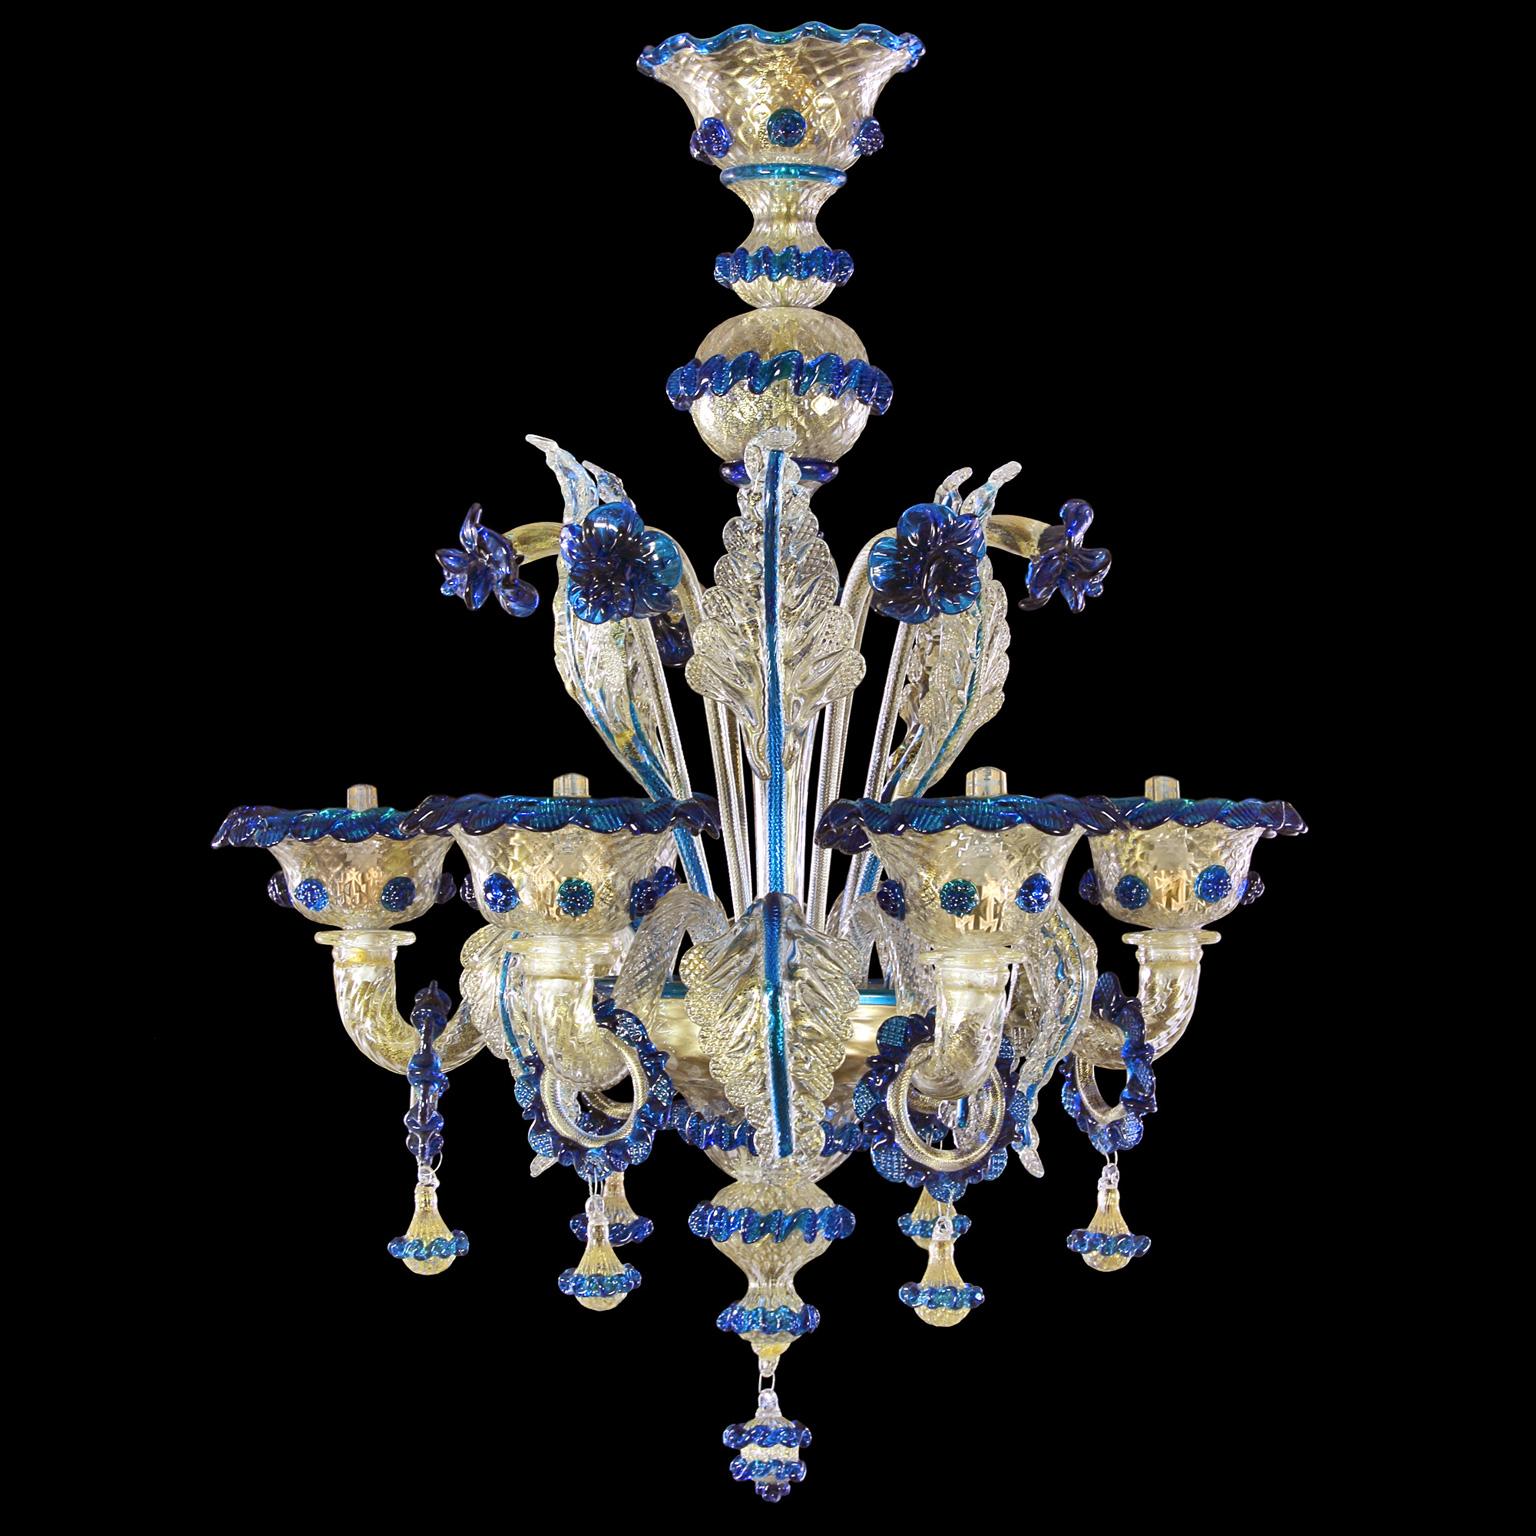 Galliano chandelier, 6-light, gold Murano glass, blue details by Multiforme.
This artistic glass chandelier has 6-light, is handmade in crystal and pink glass with polychrome vitreous paste glass flowers.
Galliano is our tribute to the authentic